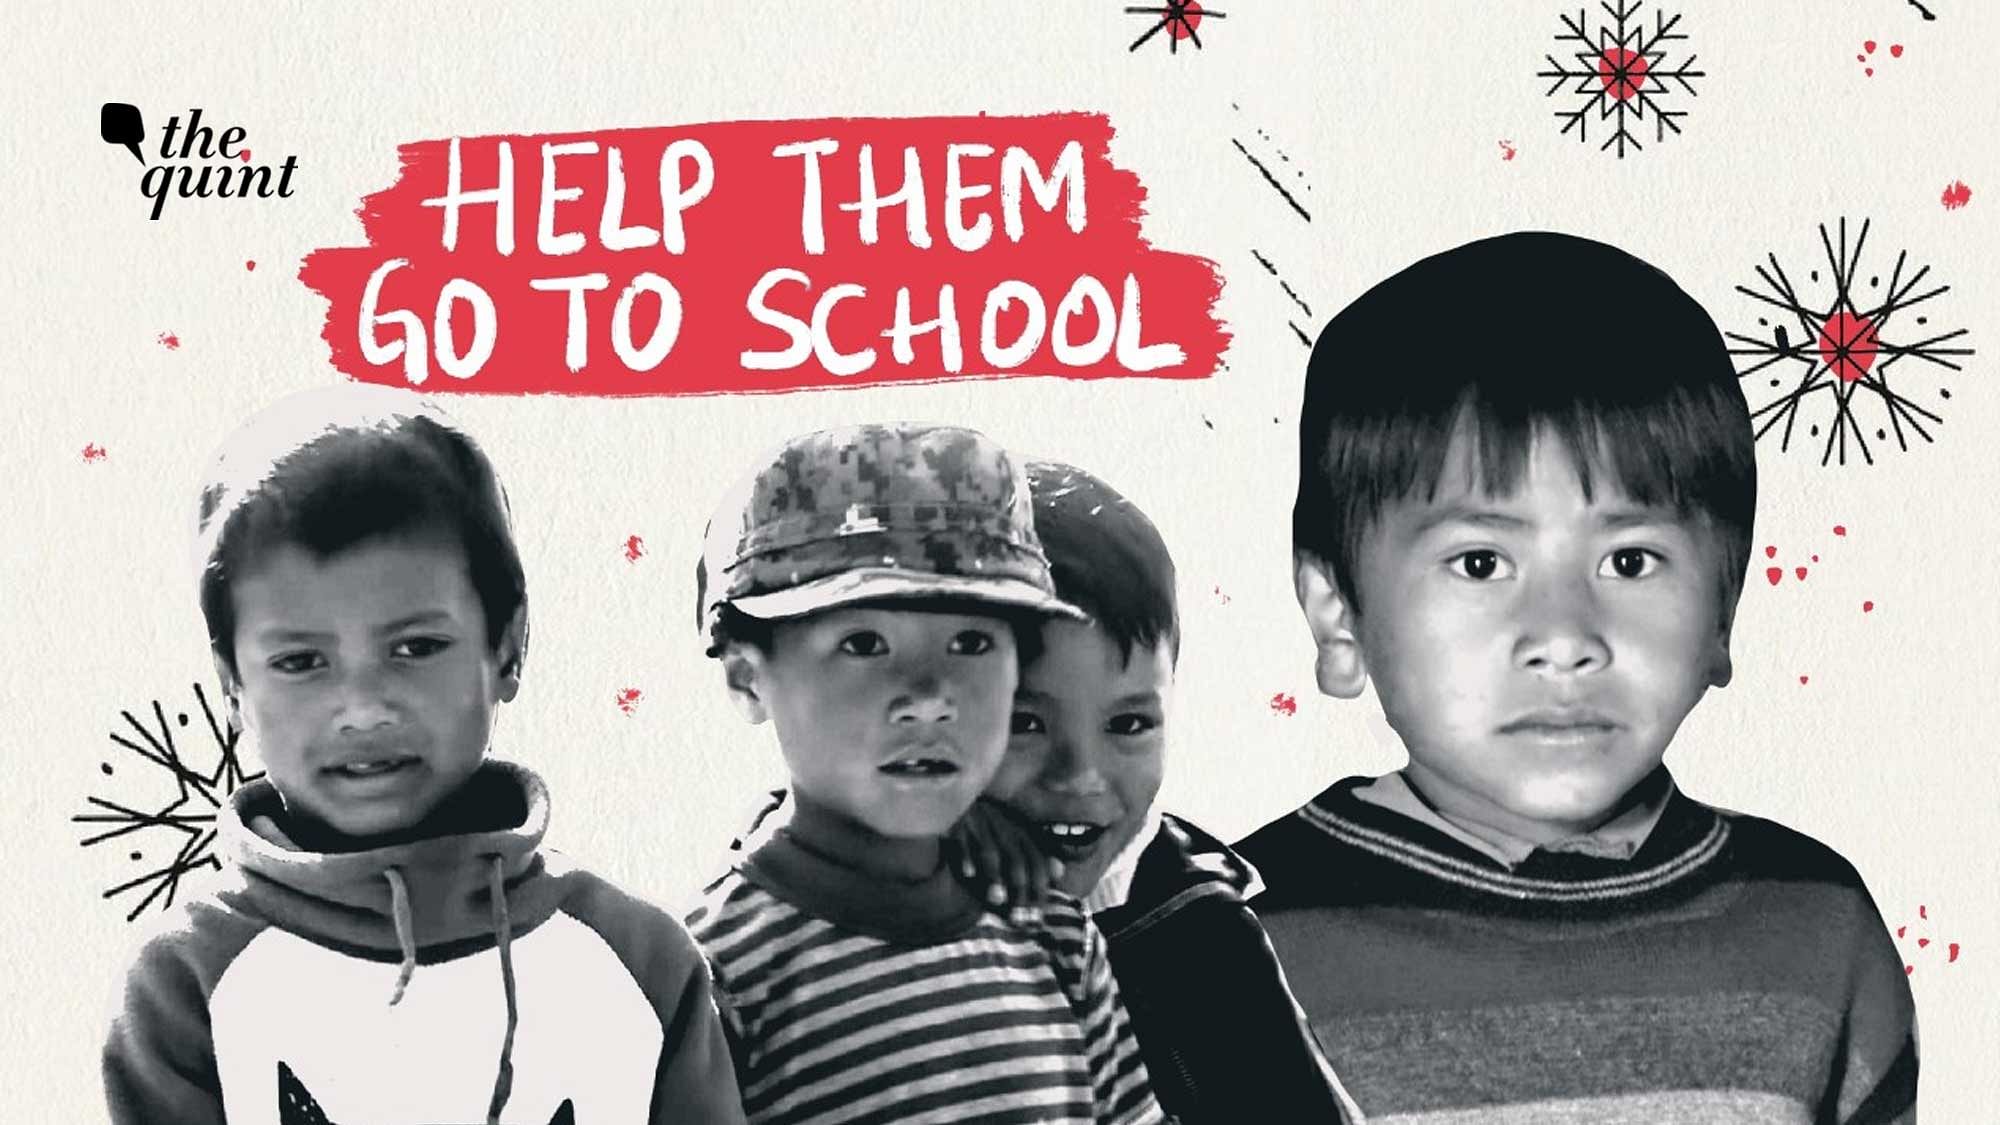 The children of Dommawlieh Pariong in Meghalaya need your help to go to school.  